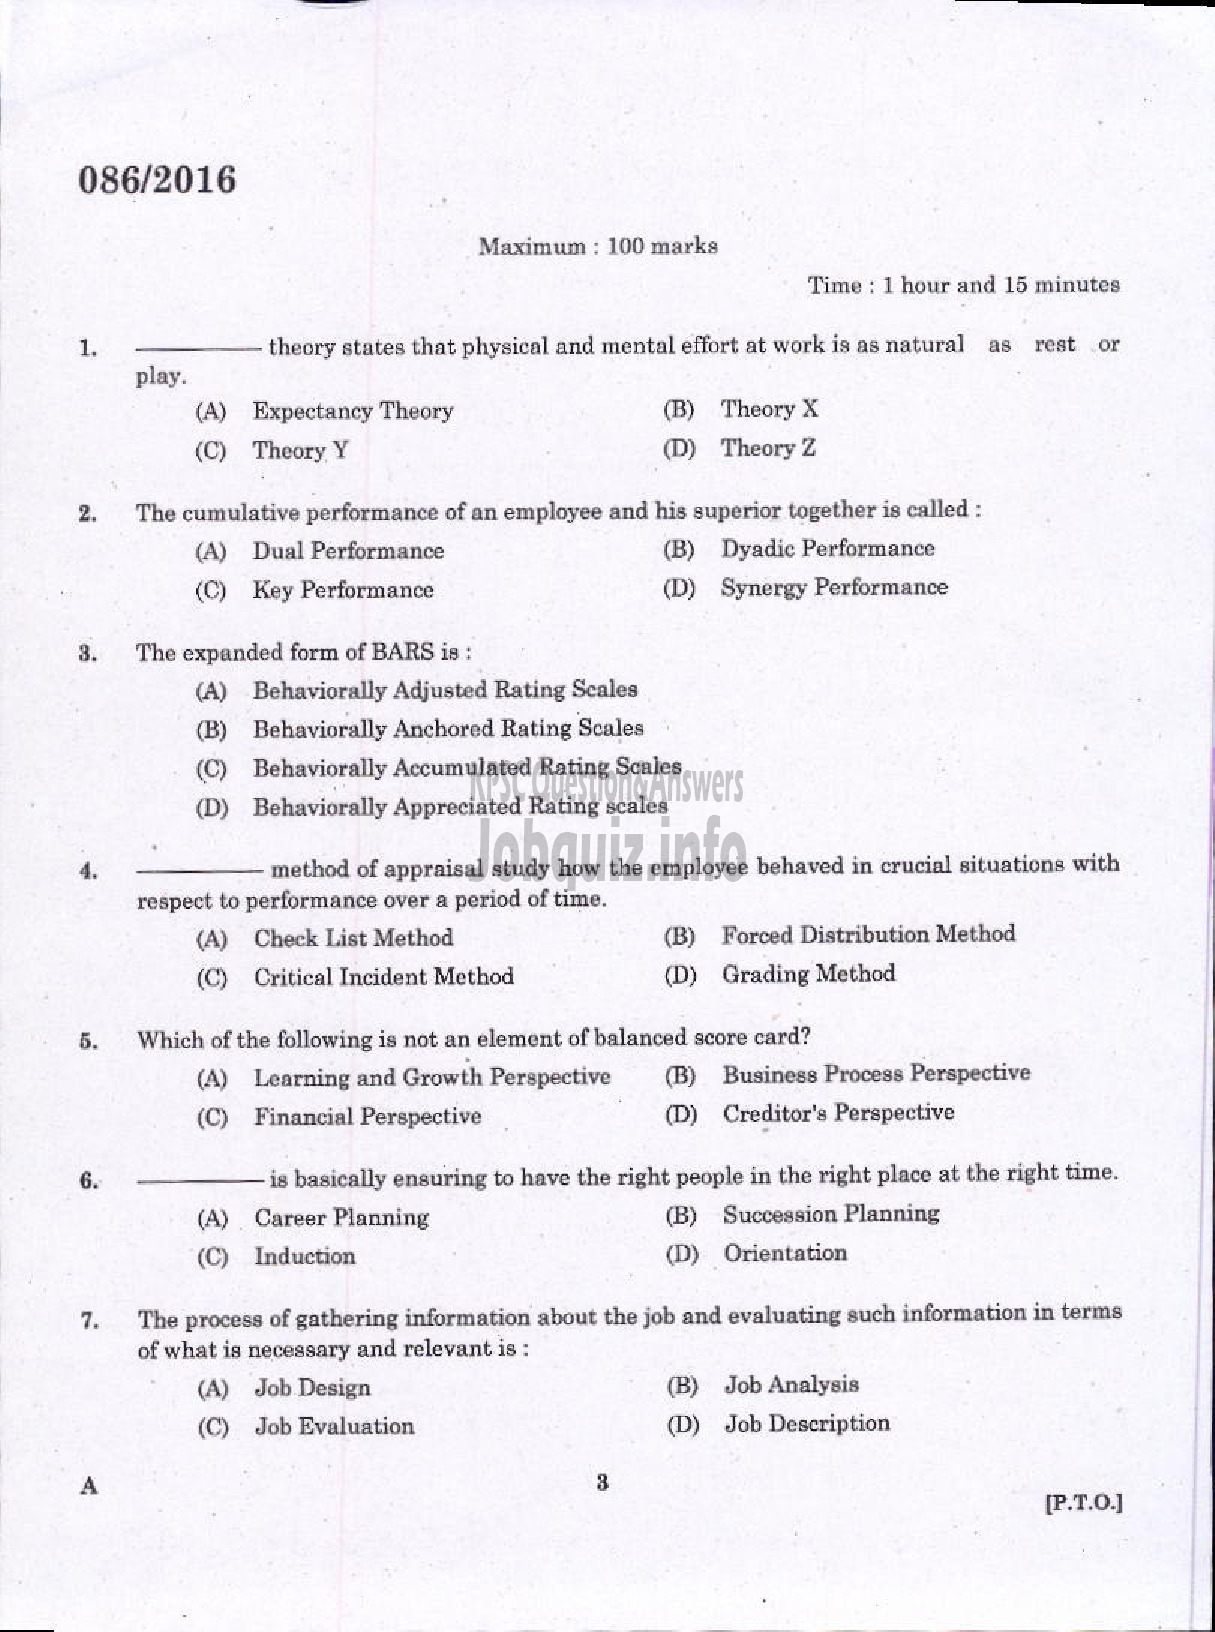 Kerala PSC Question Paper - PERSONNEL MANAGER KERALA STATE COIR CORPORATION LIMITED-1